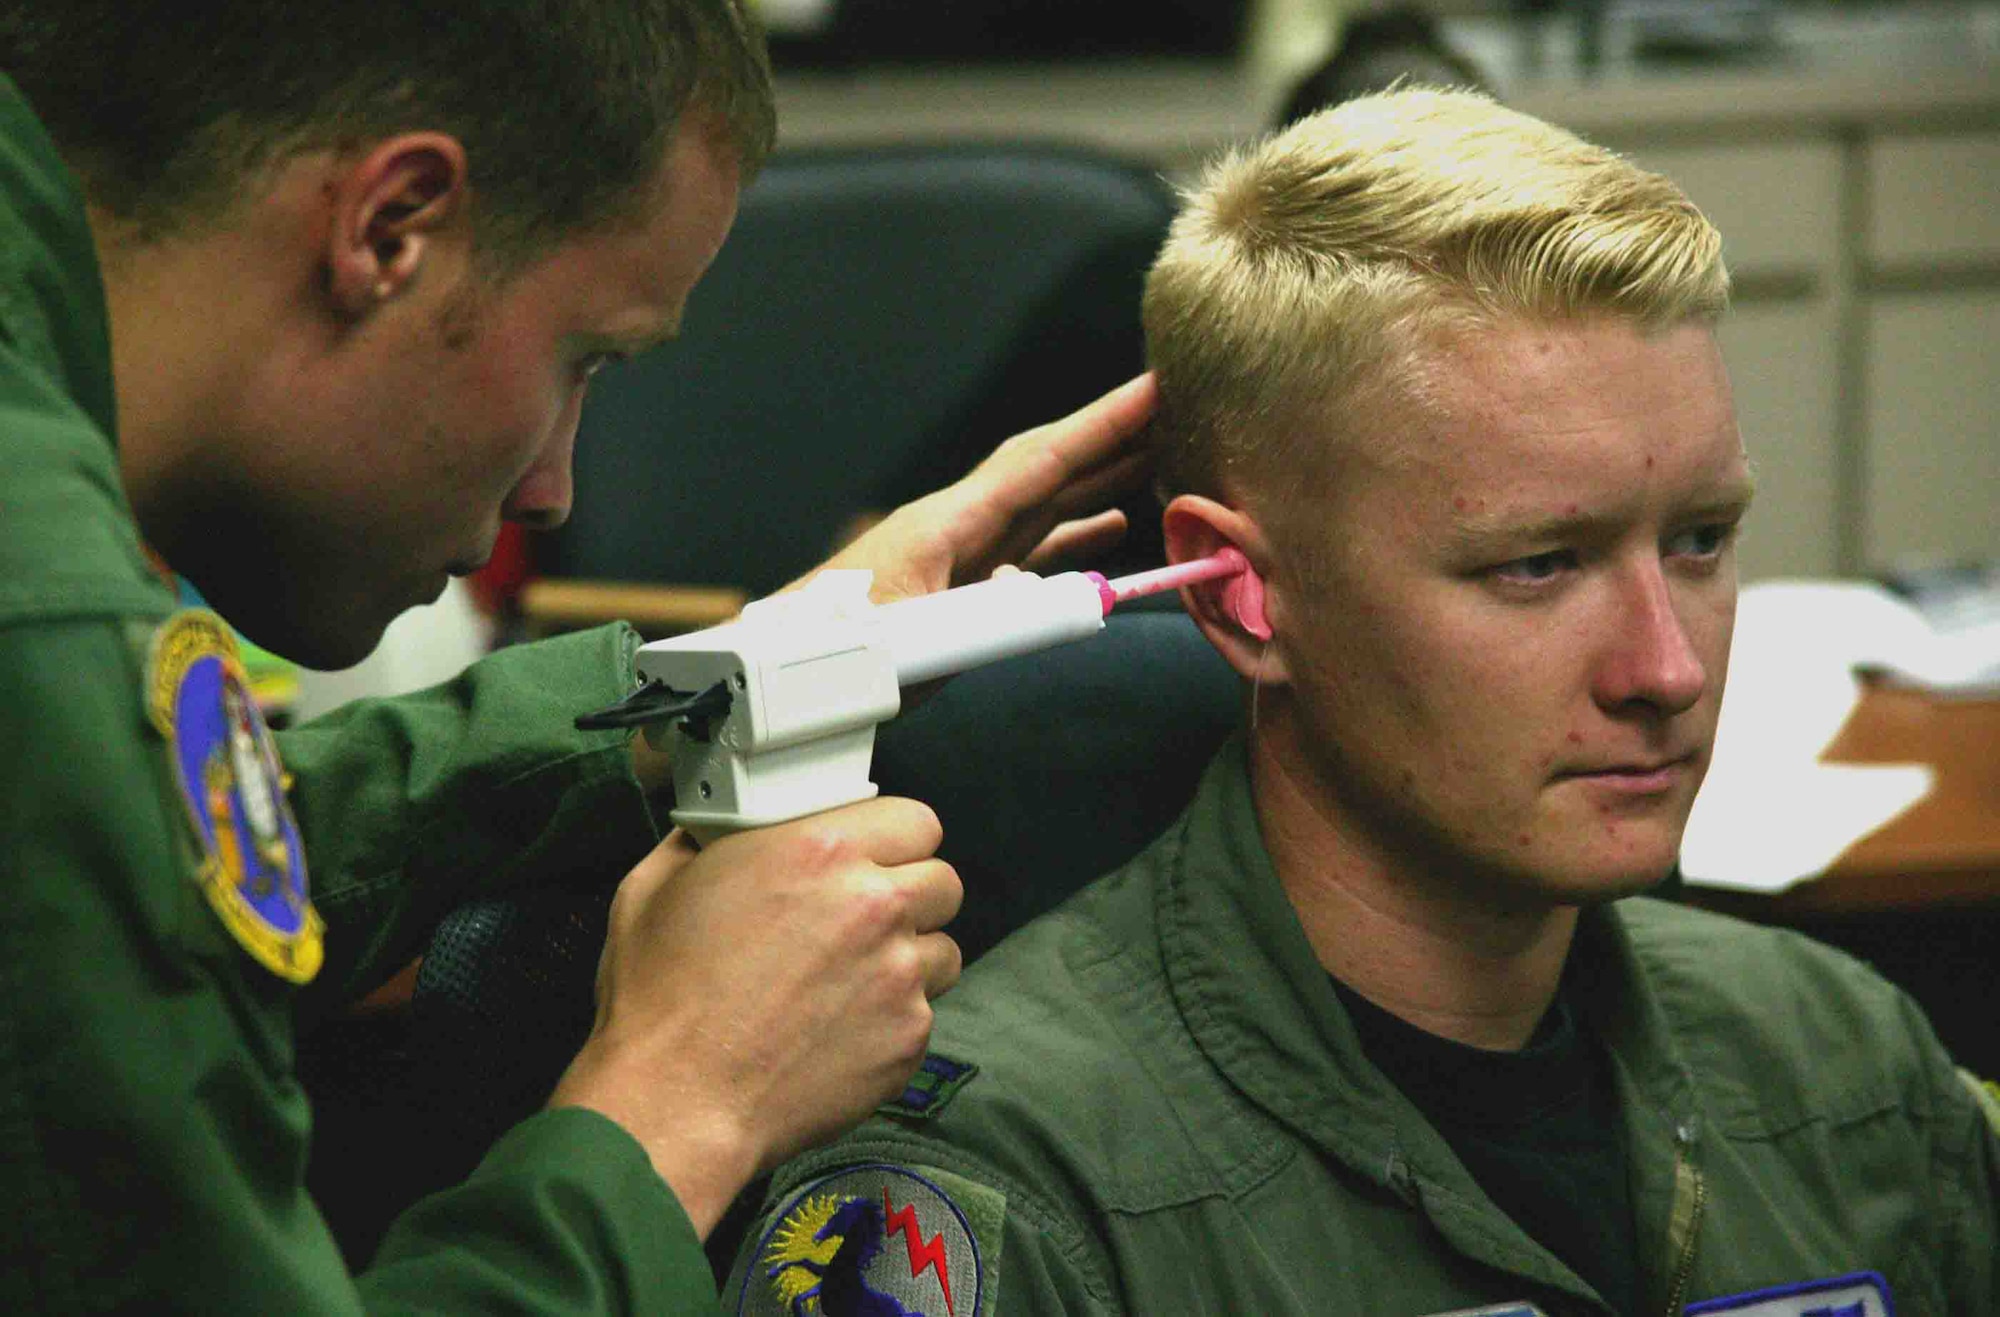 2nd Lt. Chris Reichlen (left) inserts silicone based mixture into the ear of Capt. Jerad Hand to make an inner-ear mold for the Attenuating Custom Communications Earpiece System Sept. 14 at Shaw Air Force Base, S.C. The ACCES device will significantly reduce surrounding ambient noise that pilots hear in the cockpit and increase the efficiency of radio communications. Lieutenant Reichlen is a 20th Aerospace Medicine Squadron aerospace physiologist, and Captain Hand is a 79th Fighter Squadron F-16 Fighting Falcon pilot. (U.S. Air Force photo/Senior Airman John Gordinier) 
